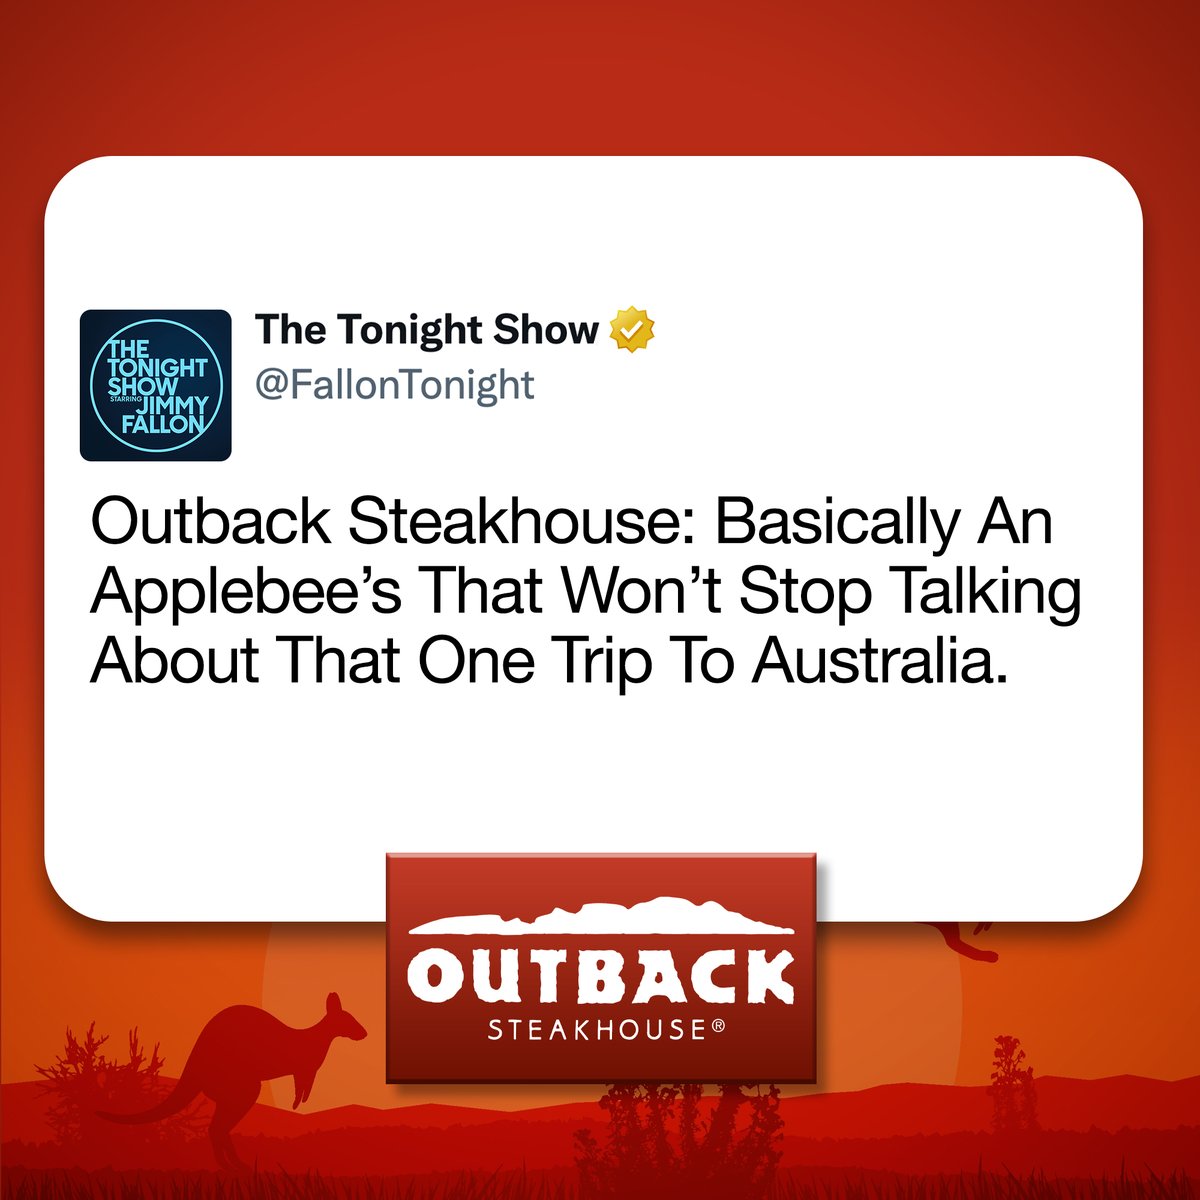 And now, a word from our sponsors… #FallonTonight